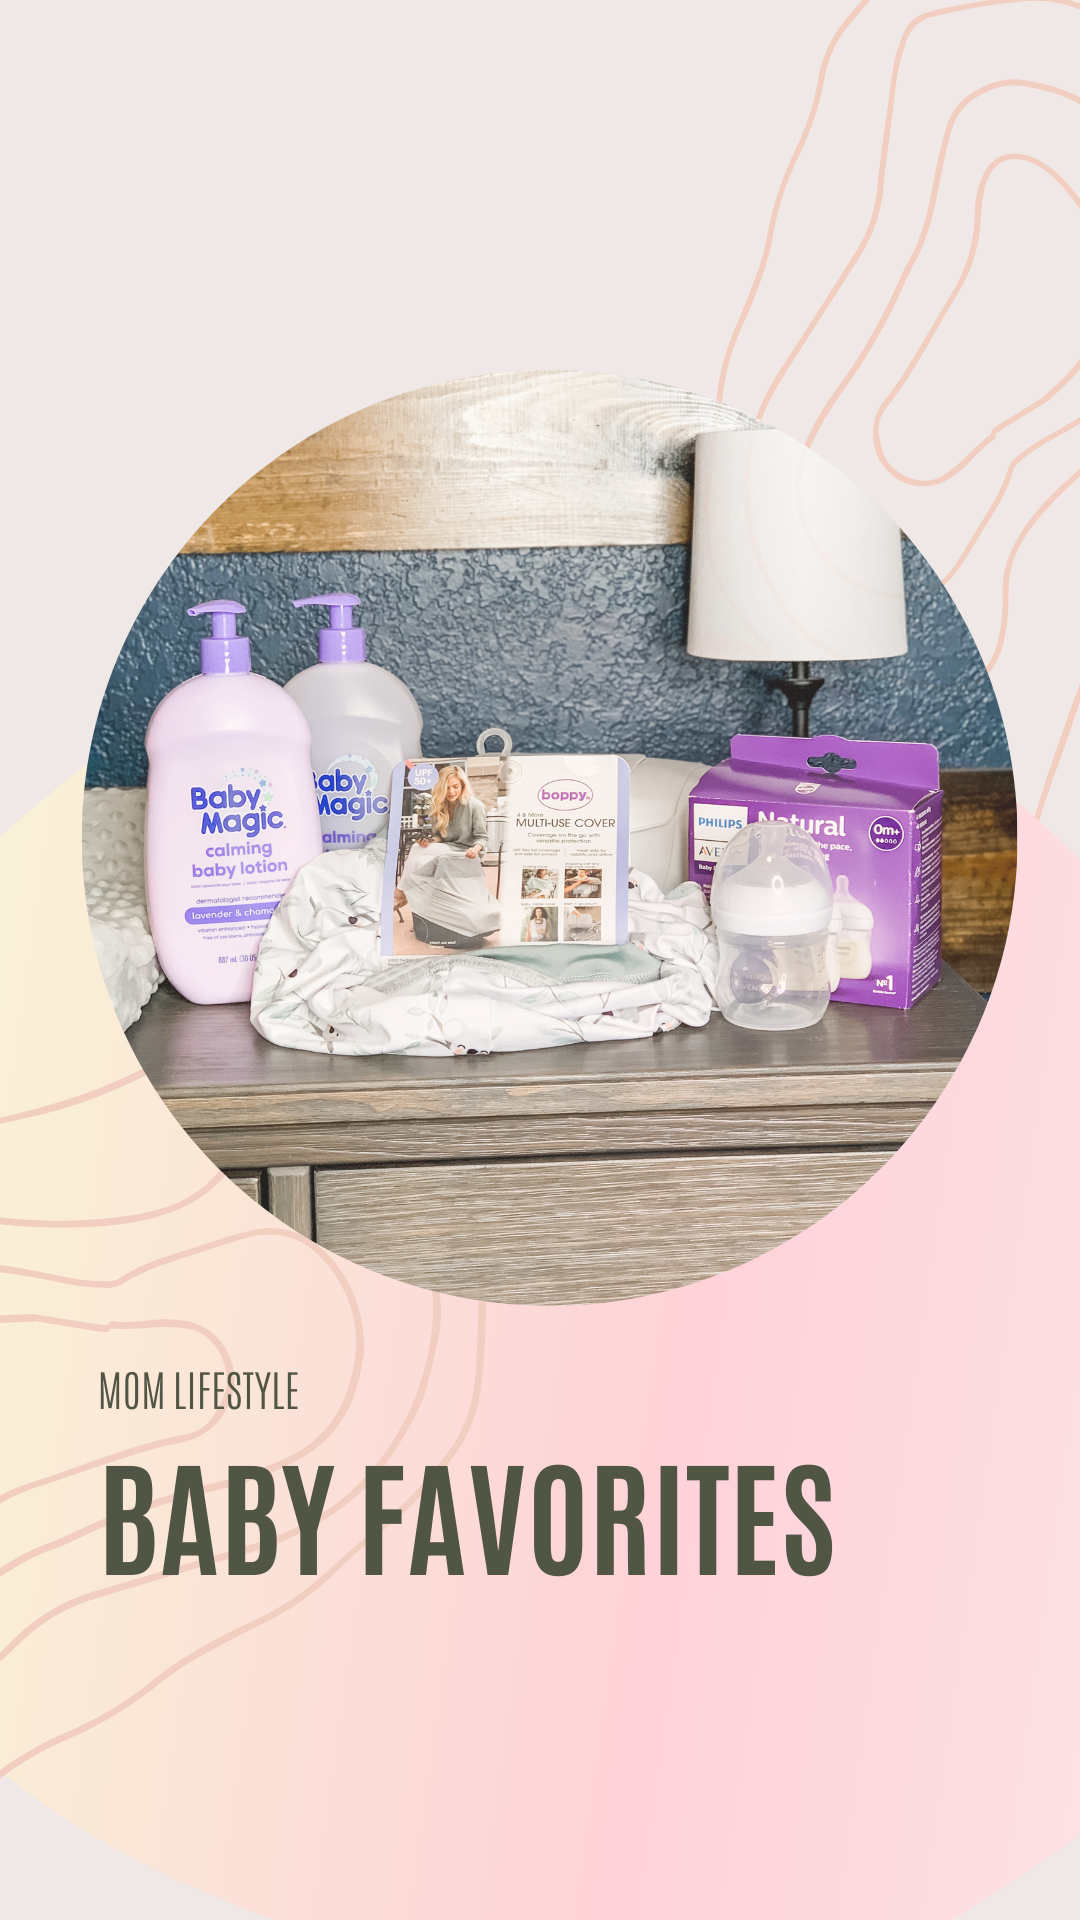 Current Baby Favorites // Newborn Essentials // Infant Essentials // Baby Must Haves | Beauty With Lily | #ad #NewYearNewMomBBxx #lovewithbabymagic #boppy #philipsavent #firsttimemom #momlifestyle